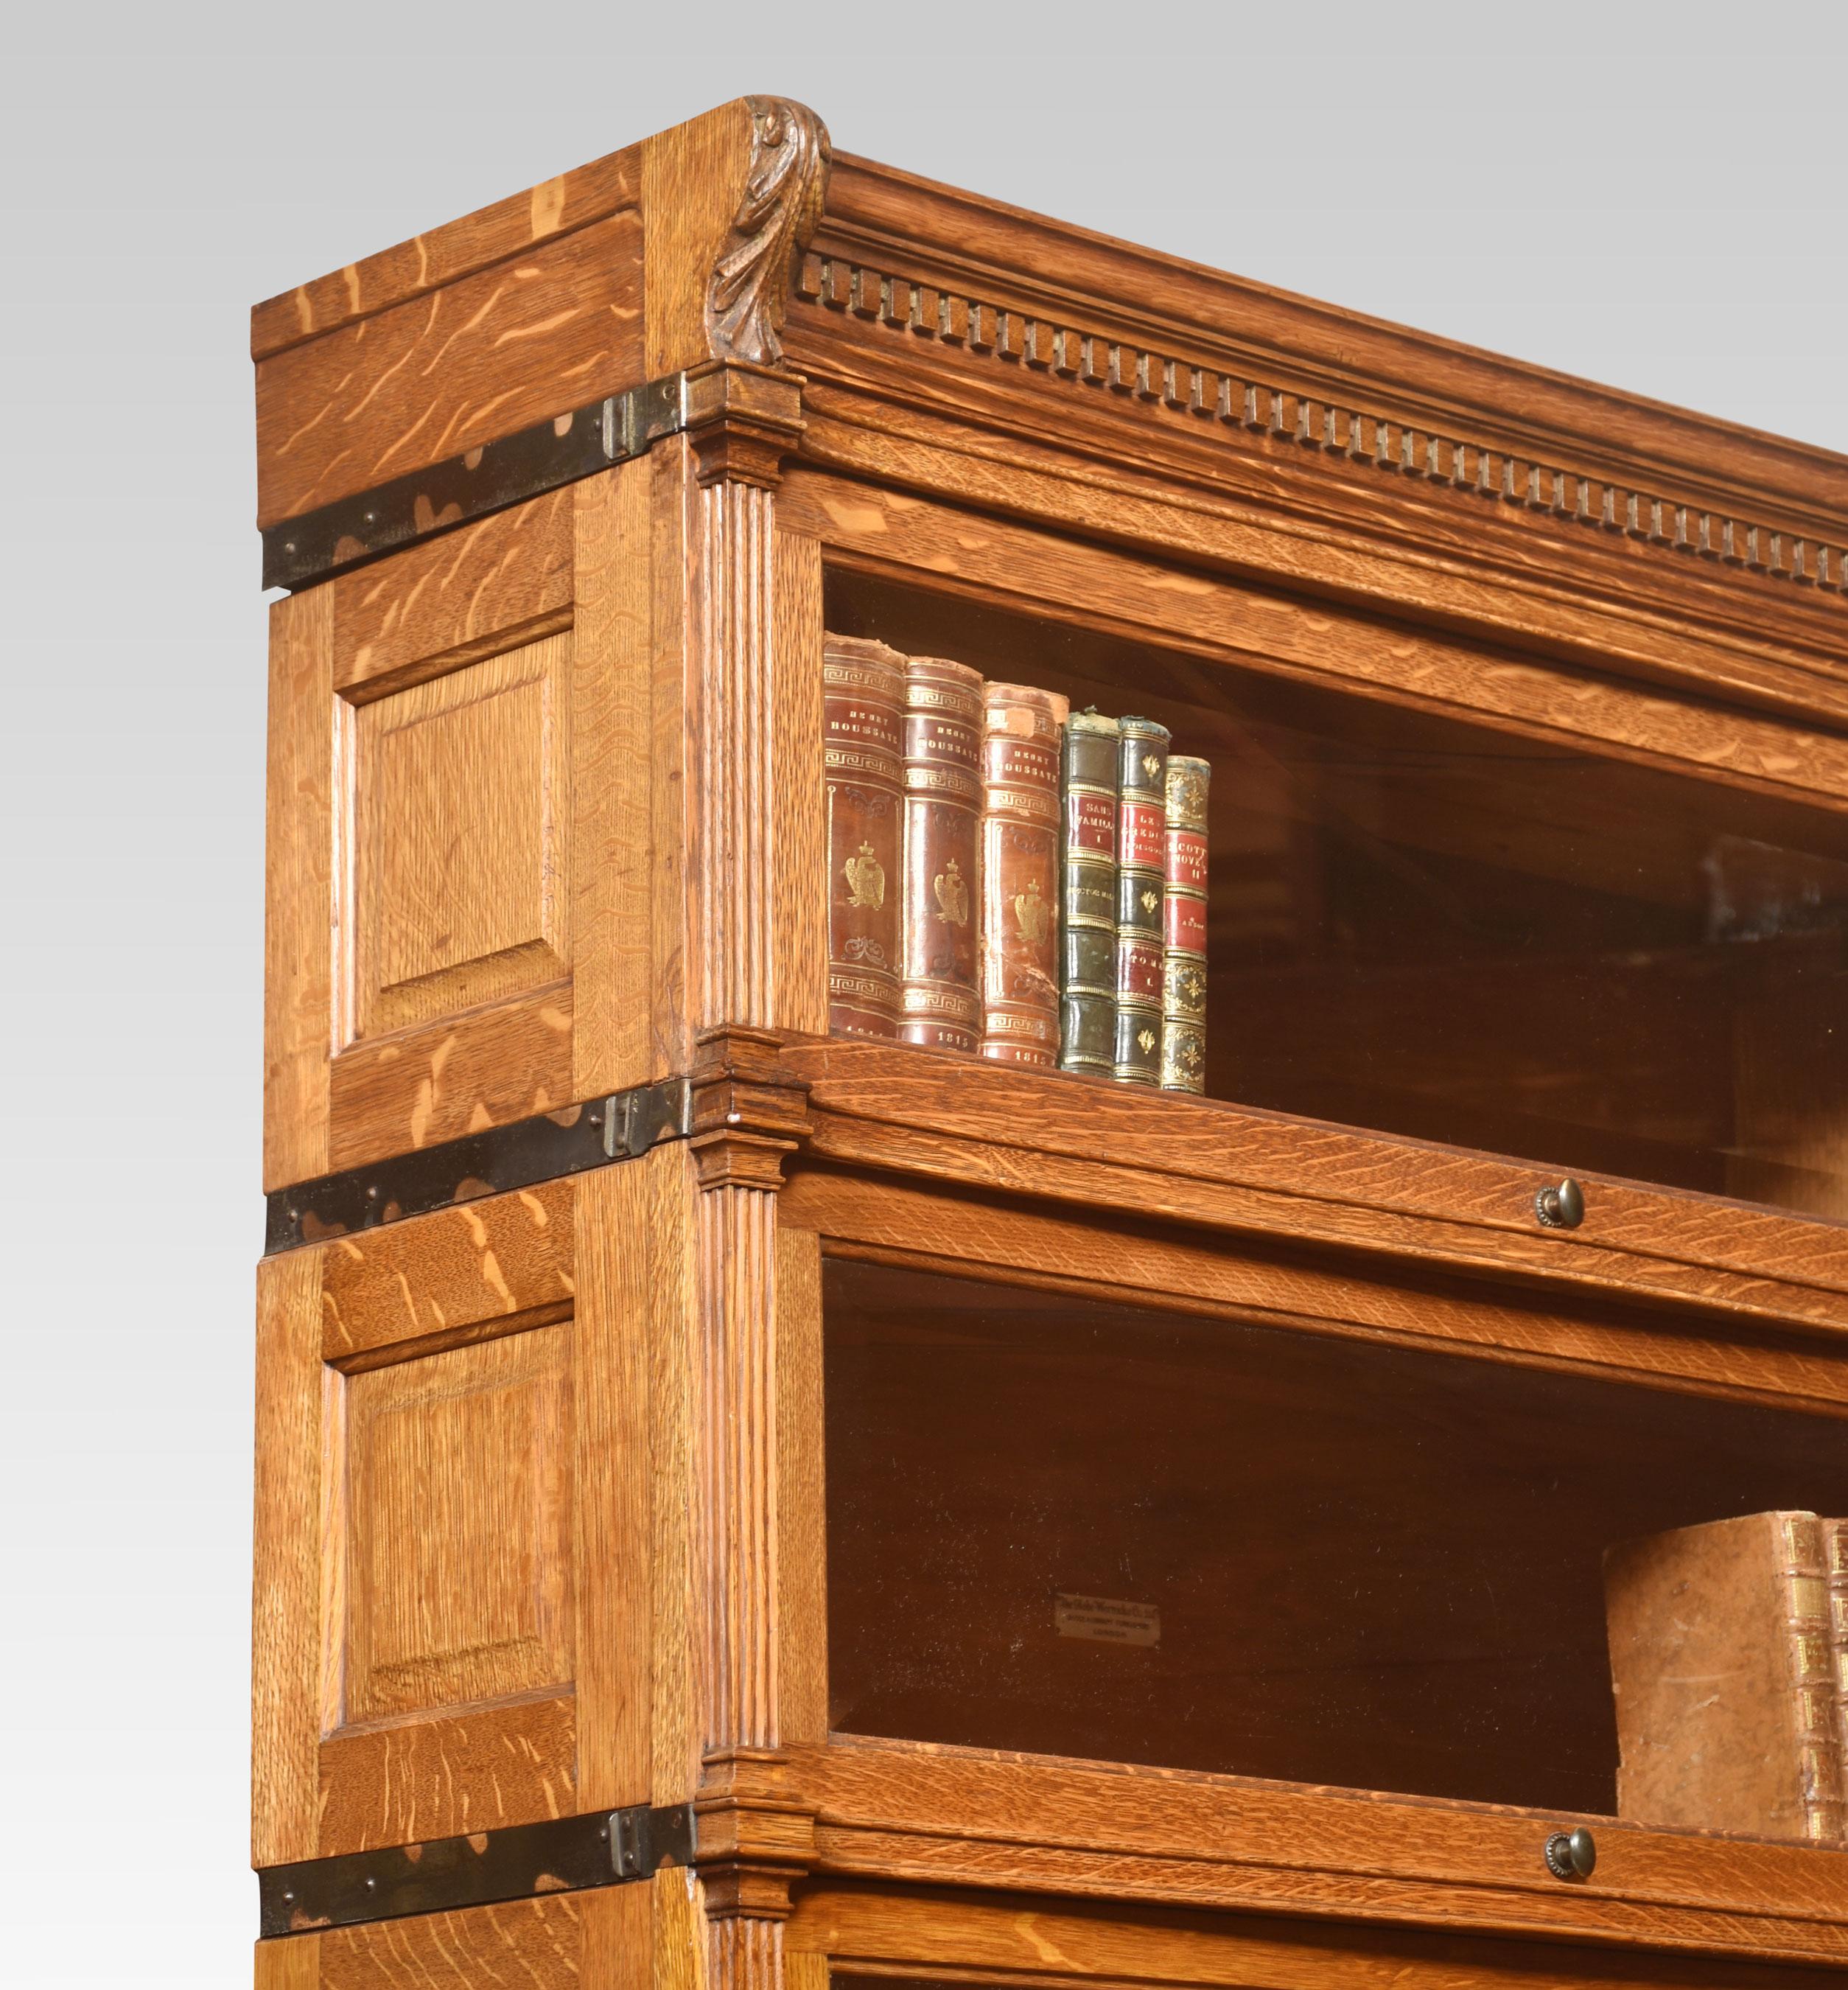 Pair of oak Globe Wernicke sectional bookcase, having six tiers with beveled glazed doors, between fluted pilasters and having paneled sides, raised on a plinth base with single long drawer.
Dimensions
Height 84.5 Inches
Width 35.5 Inches
Depth